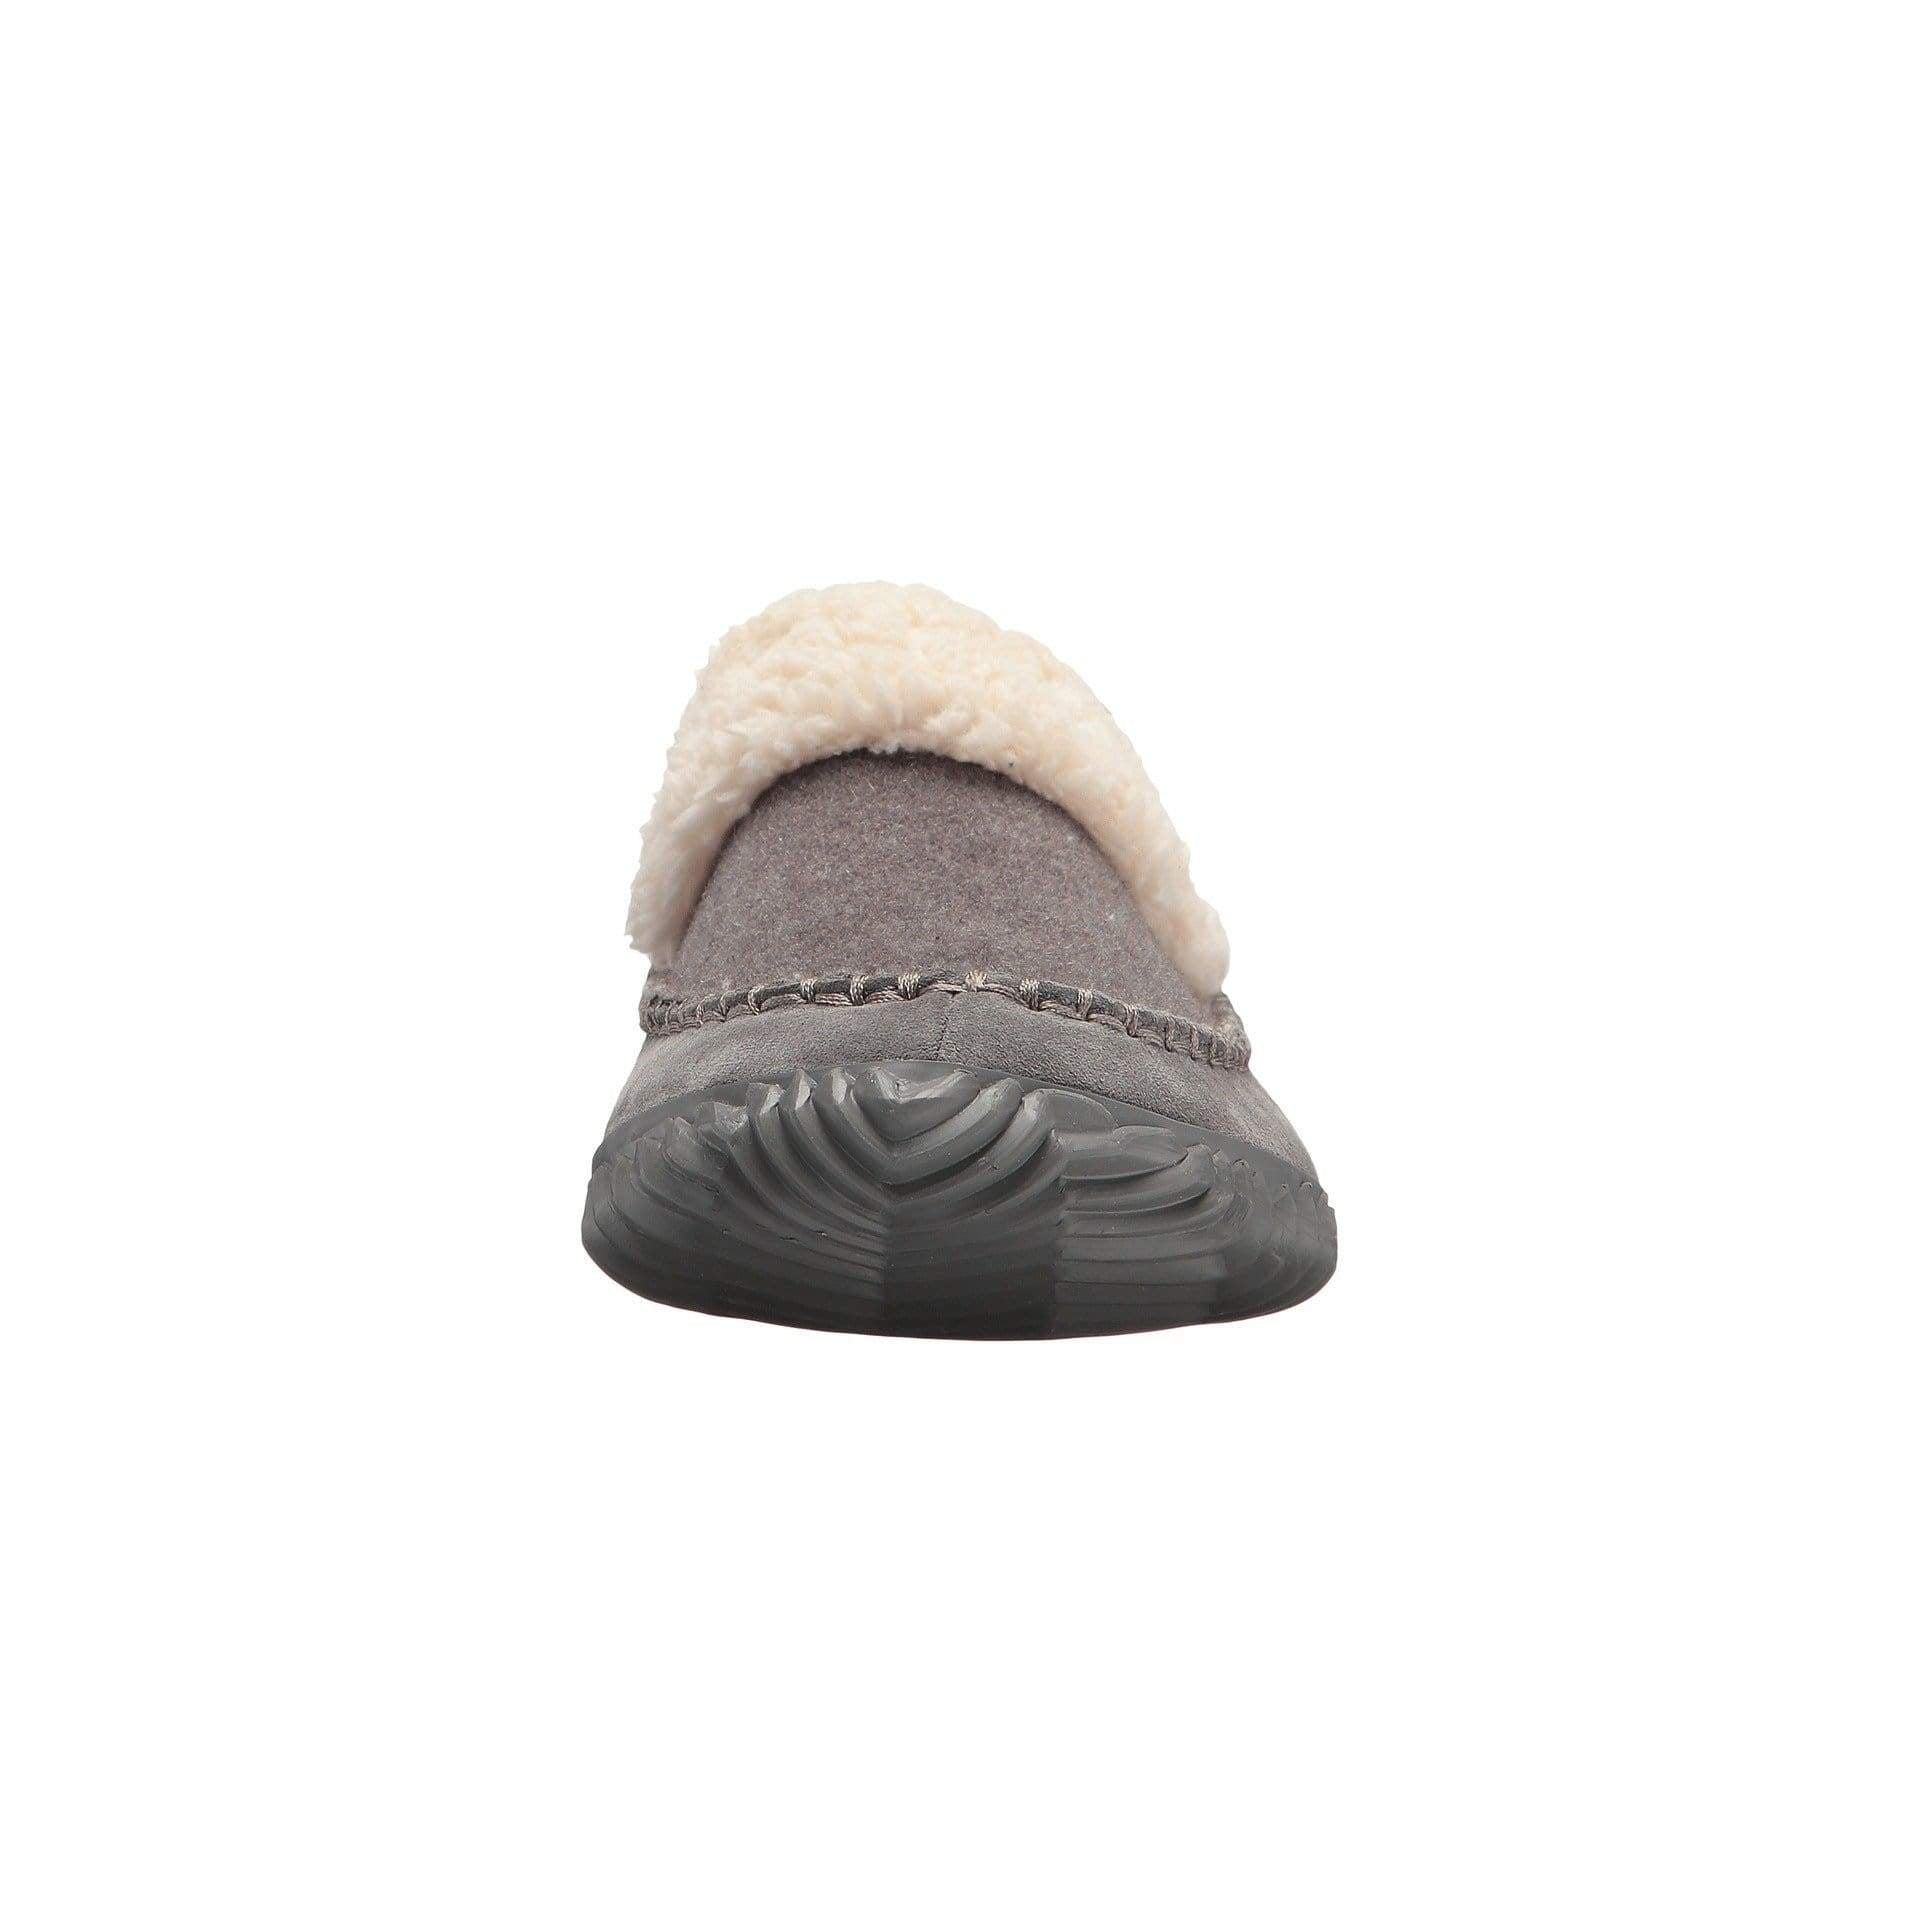 sorel women's out and about slide slipper